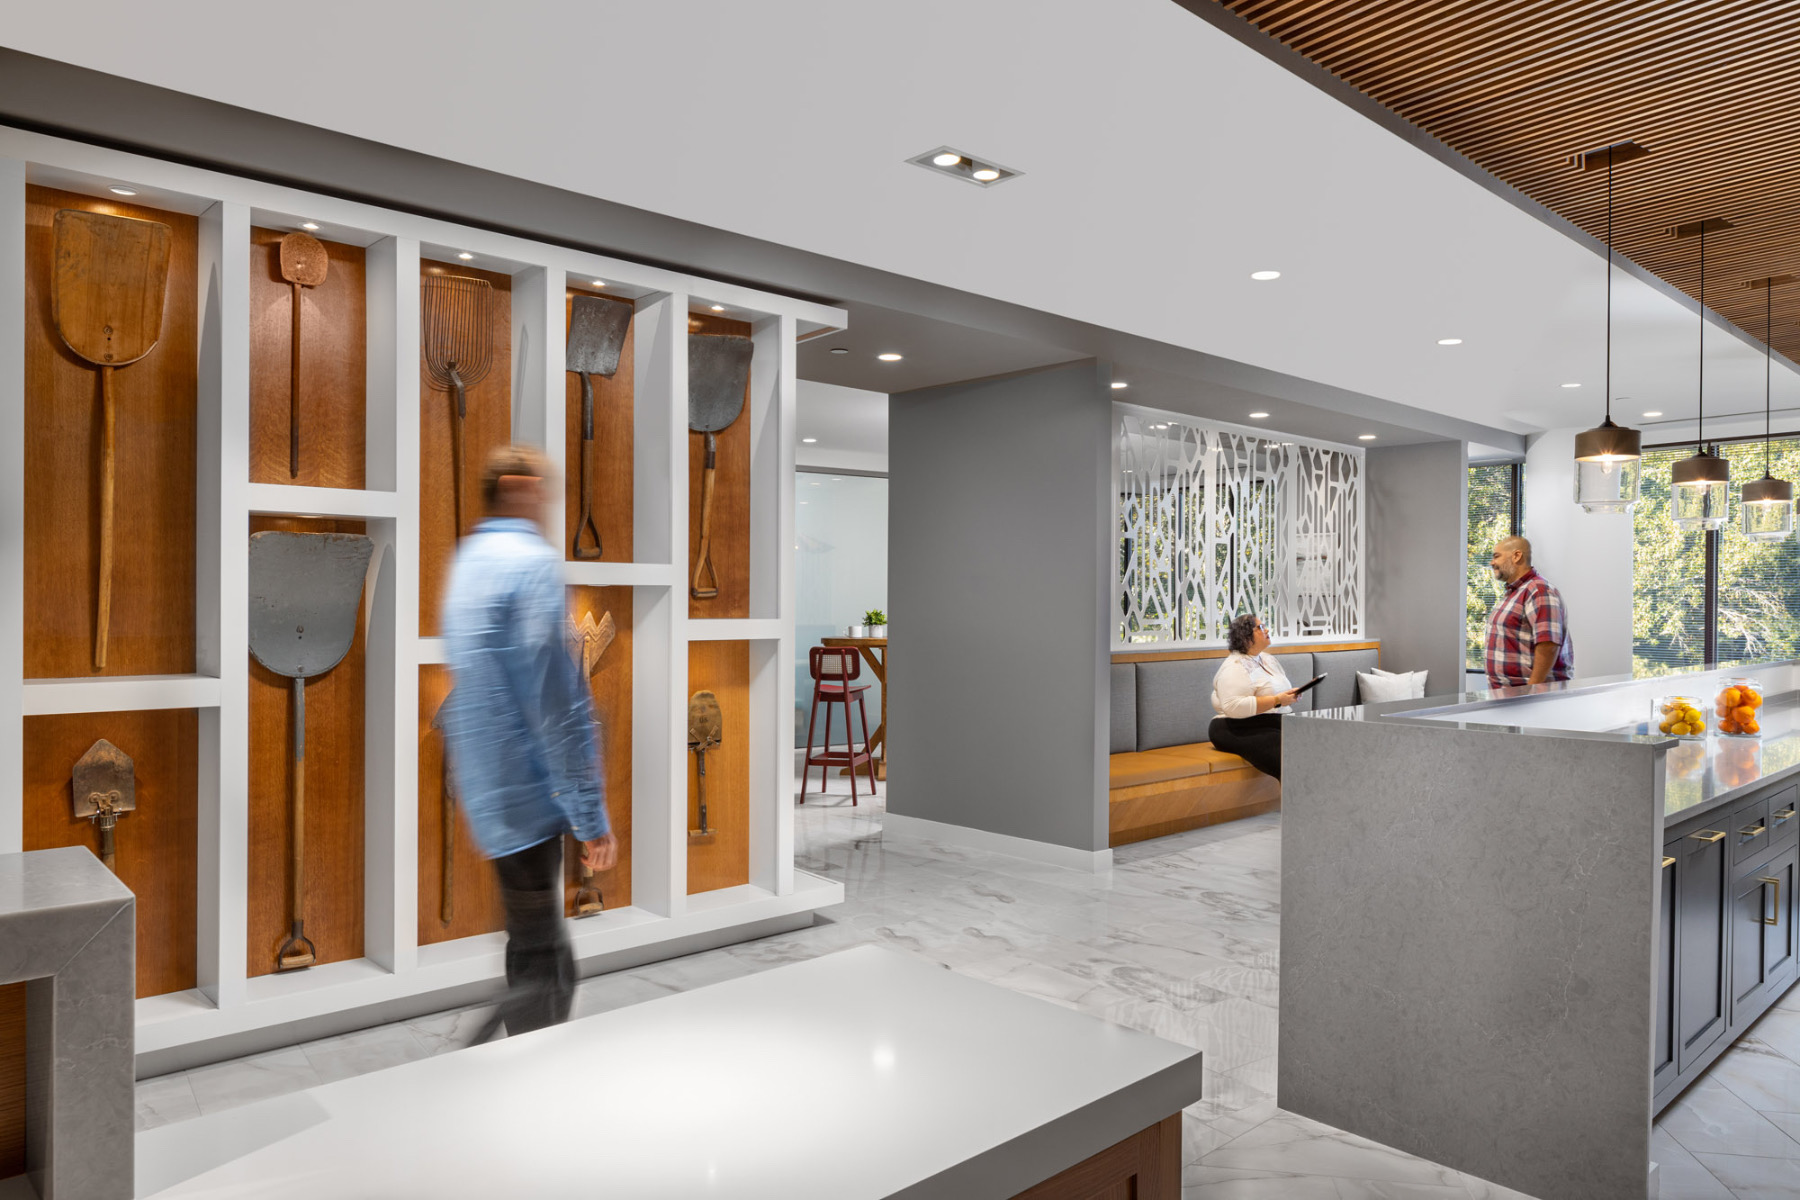 A Look Inside Soliant Health’s New Peachtree Corners Office